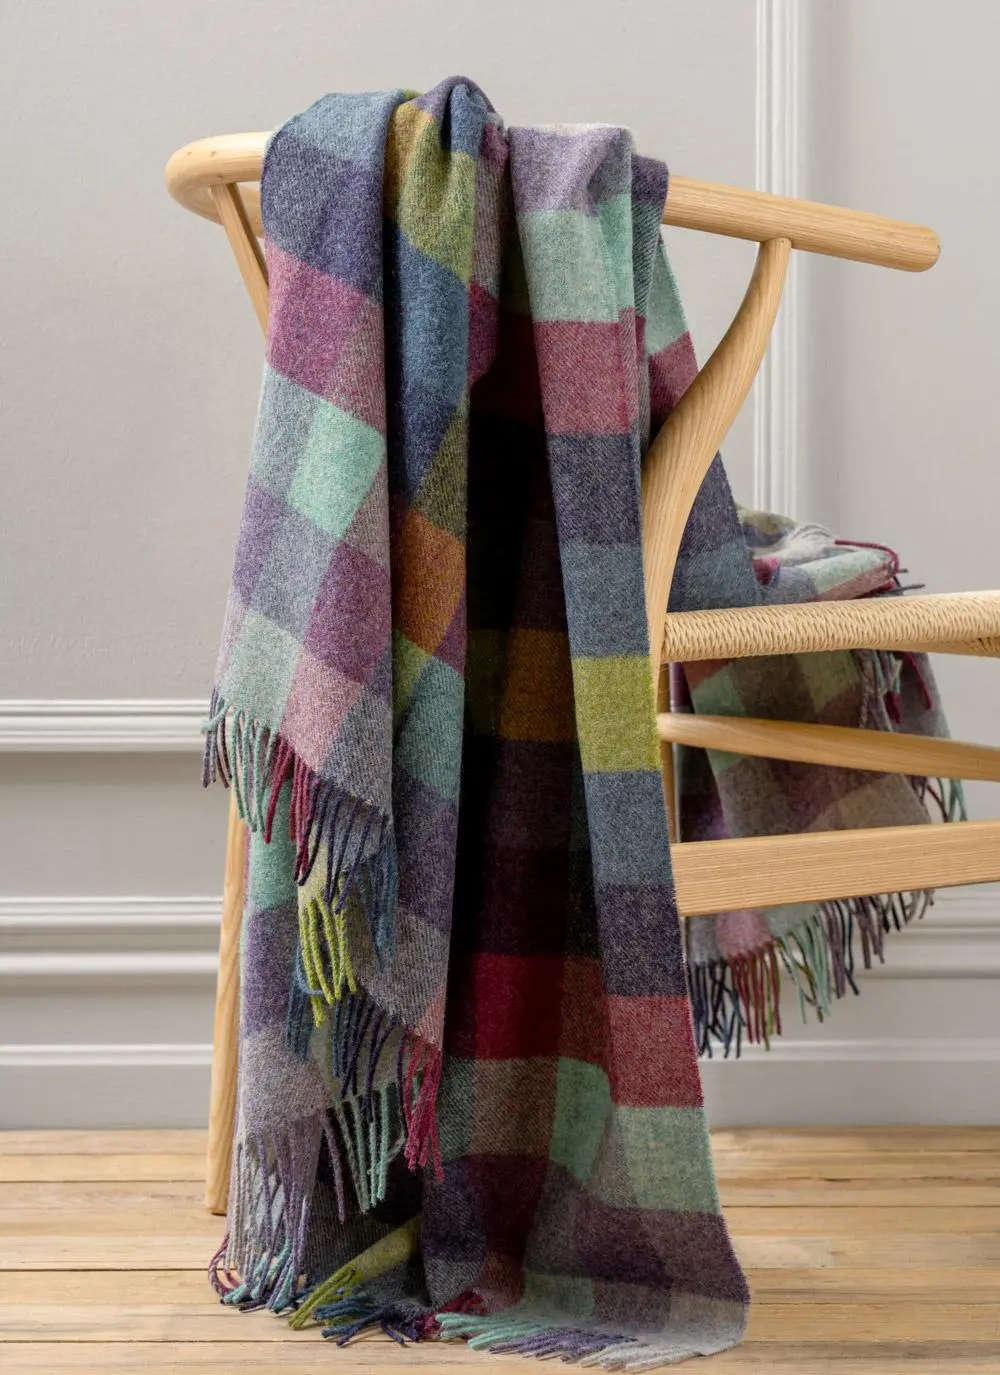 Blue and purple check highland wool throw draped across wooden chair